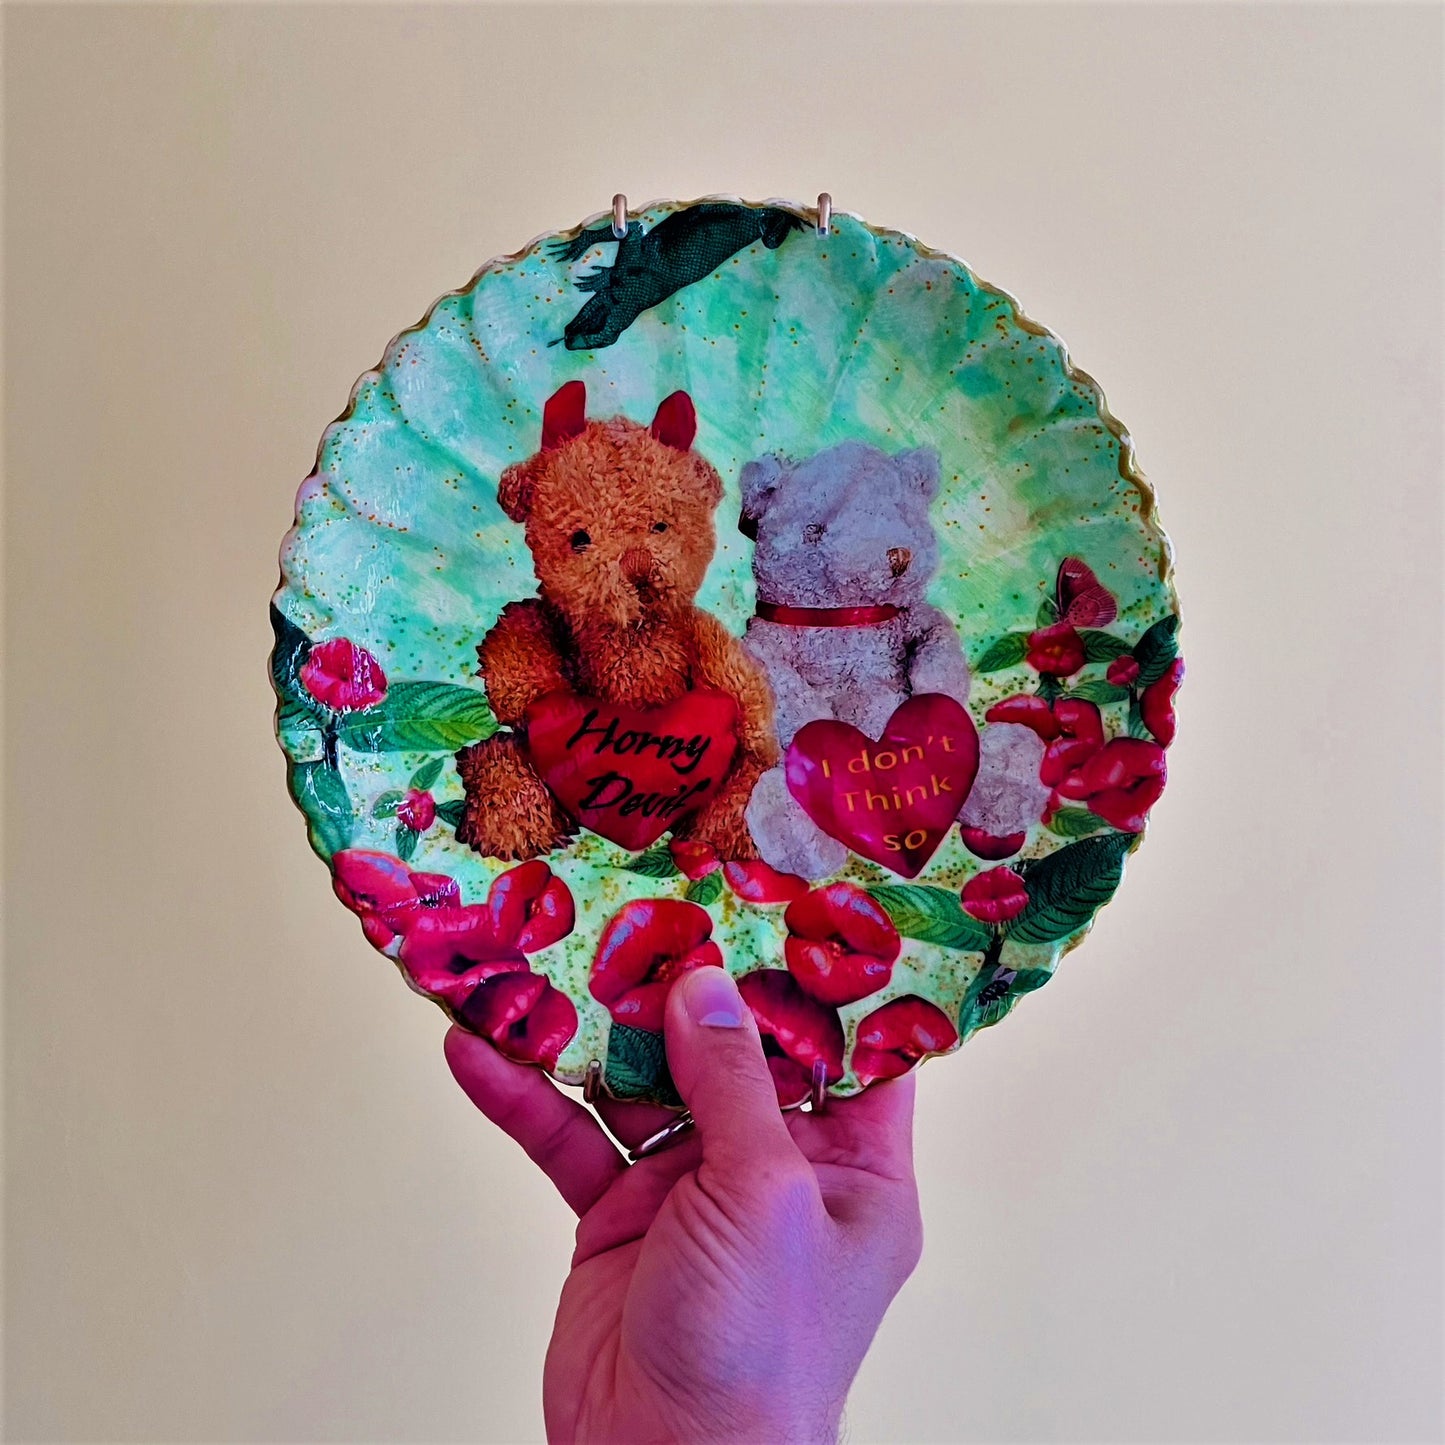 "Horny Devil. I Don't Think So" Wall Plate by House of Frisson, featuring a collage of two teddy bears holding hearts with messages, among lip-shaped flowers, on a green background. Holding the plate.